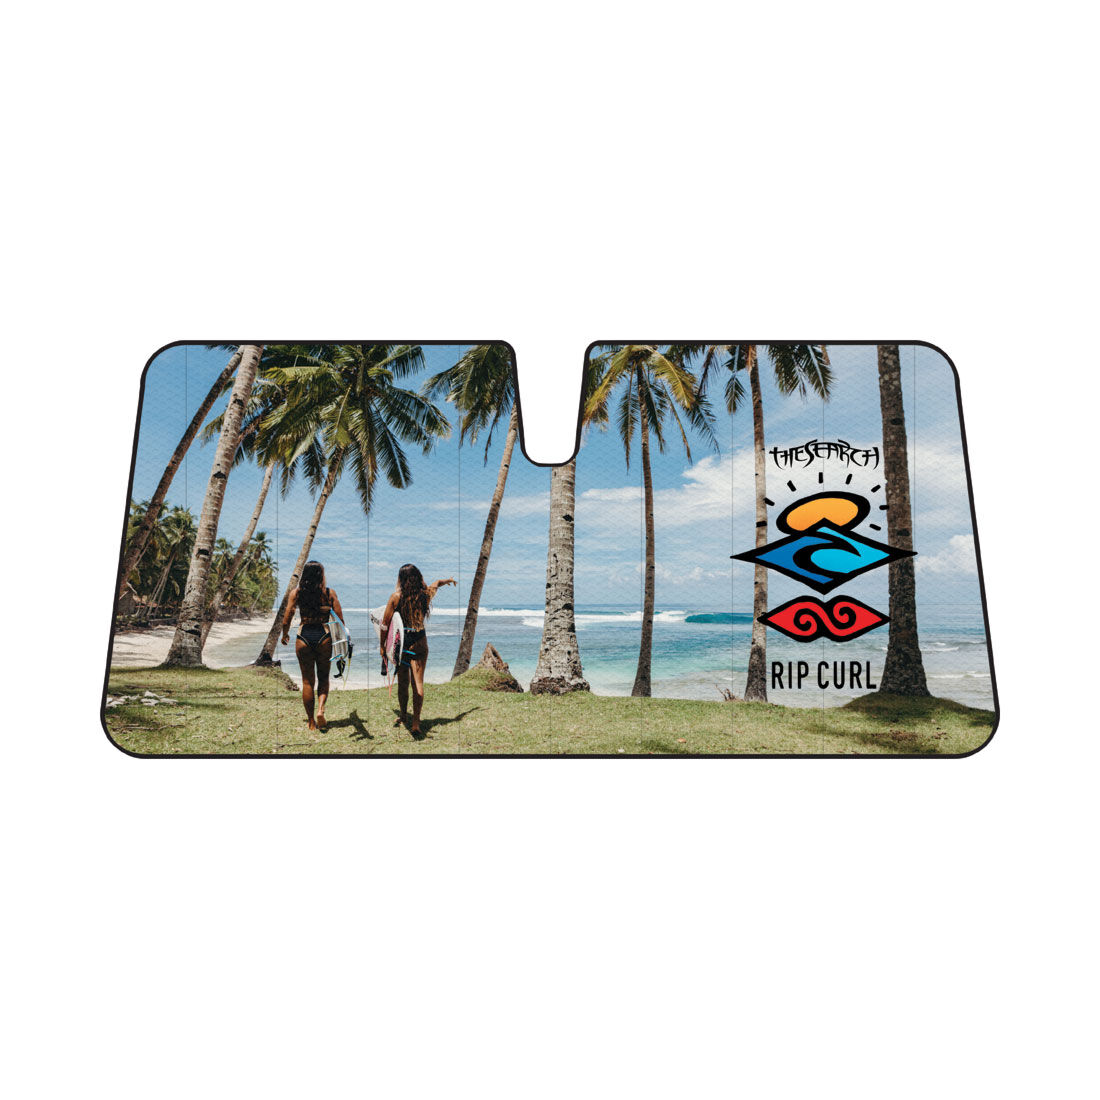 Rip Curl The Search Surfer Fashion Sunshade Accordion Front 